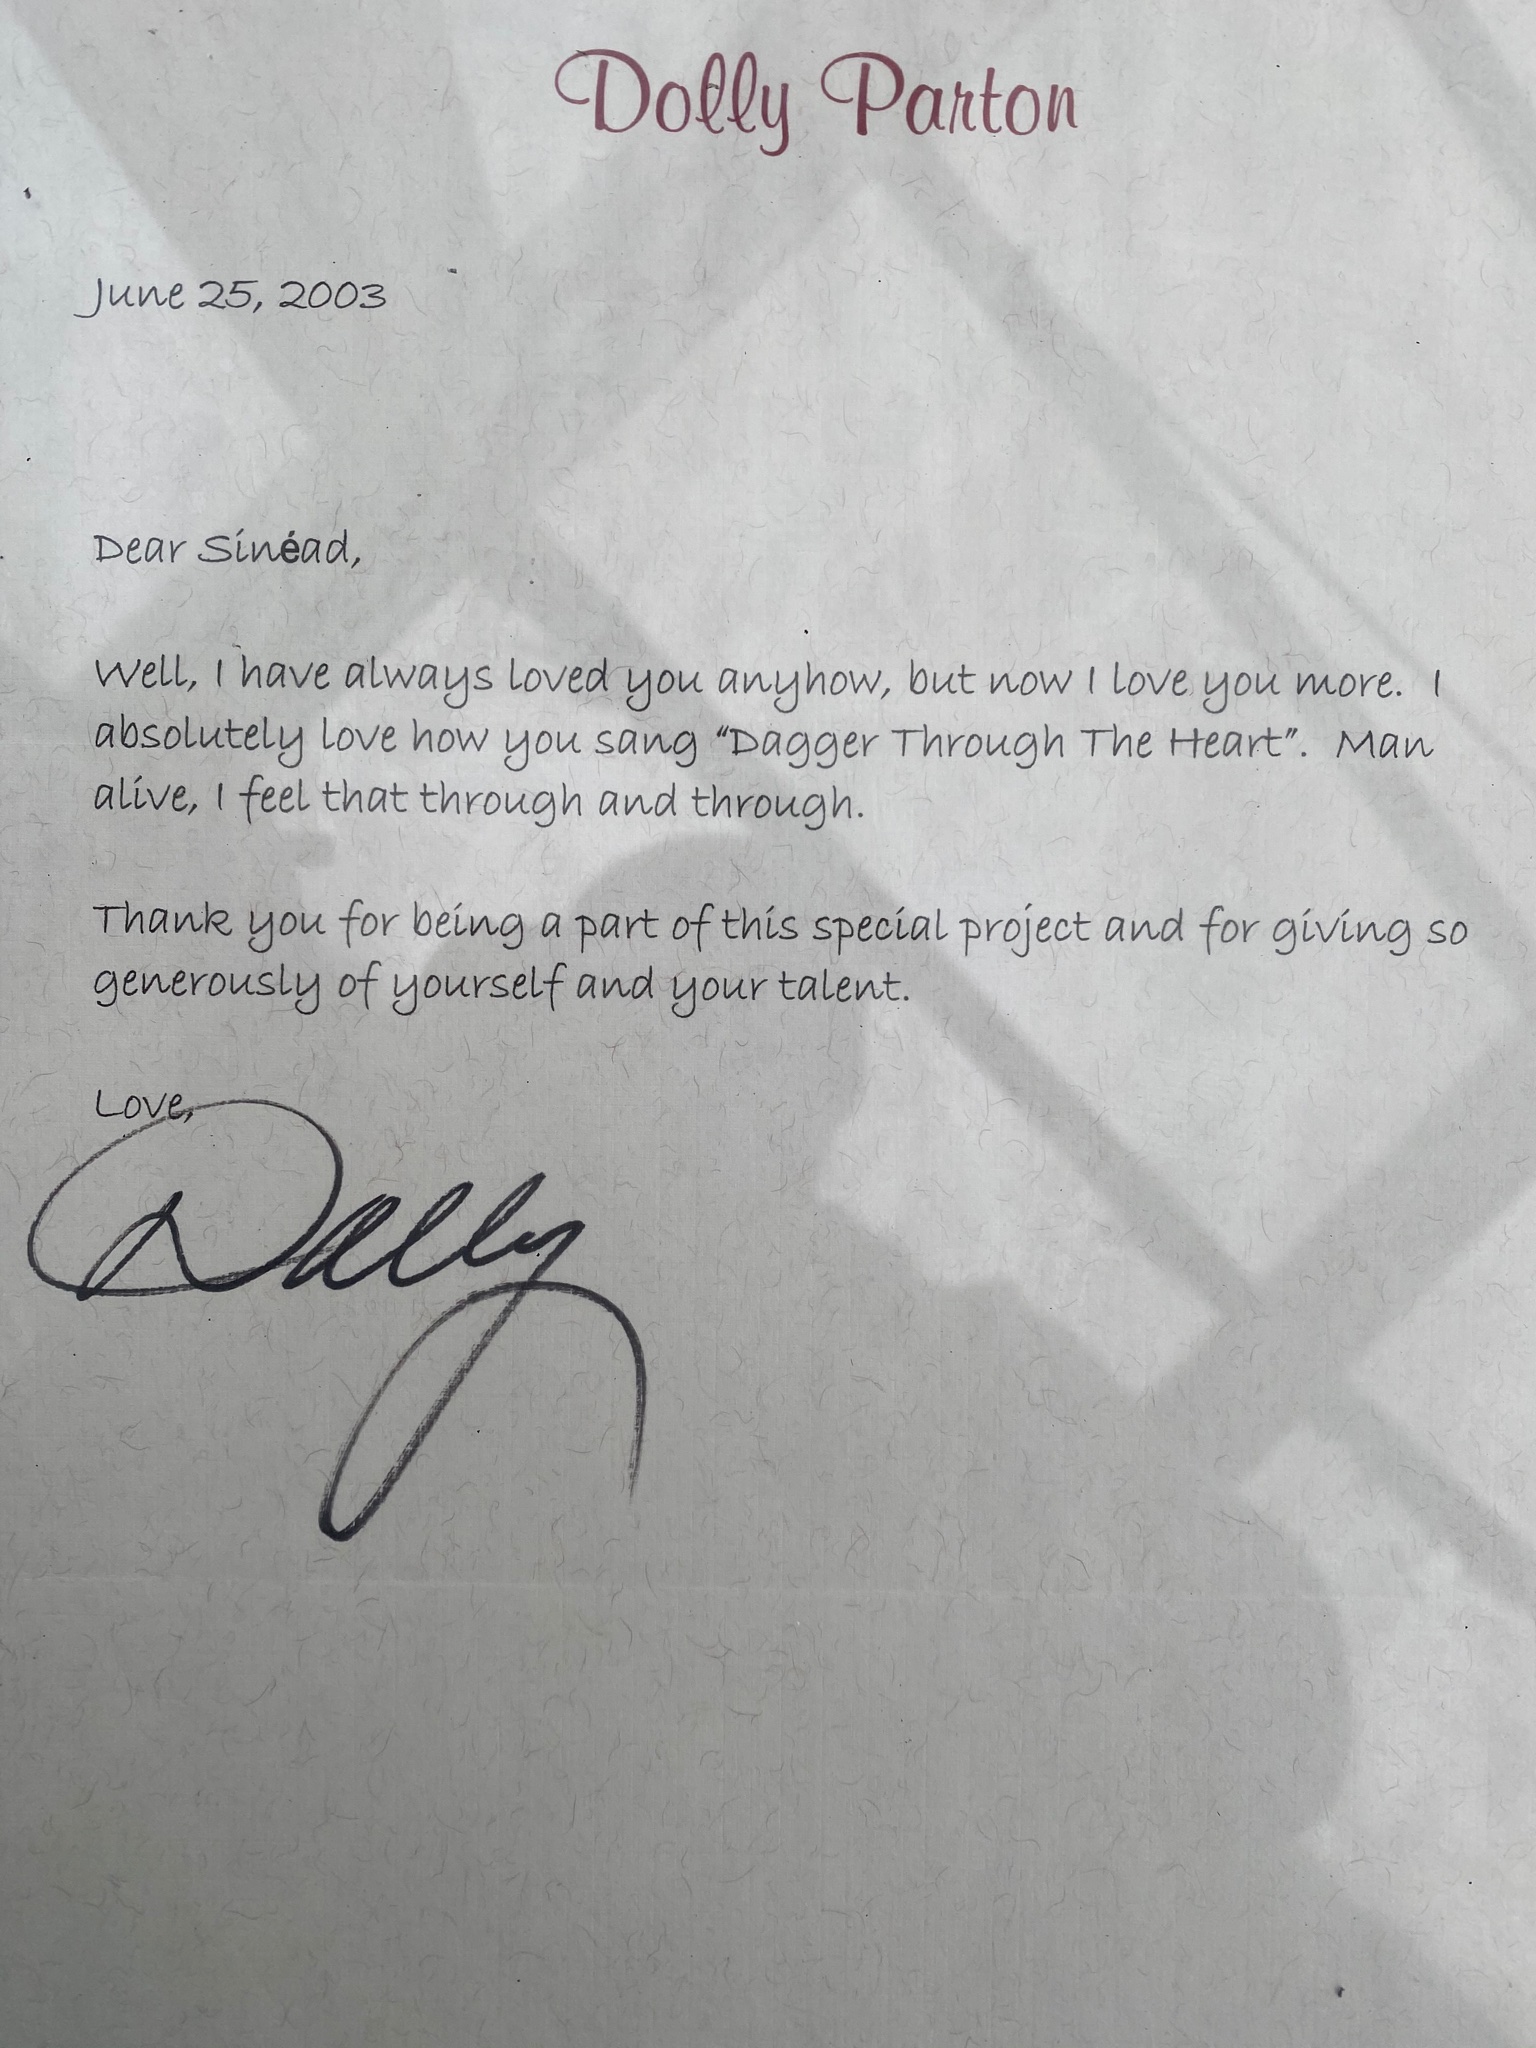 Copy of Dolly Parton's letter to Sinéad, praising Sinéad's cover of 'Dagger Through the Heart.'